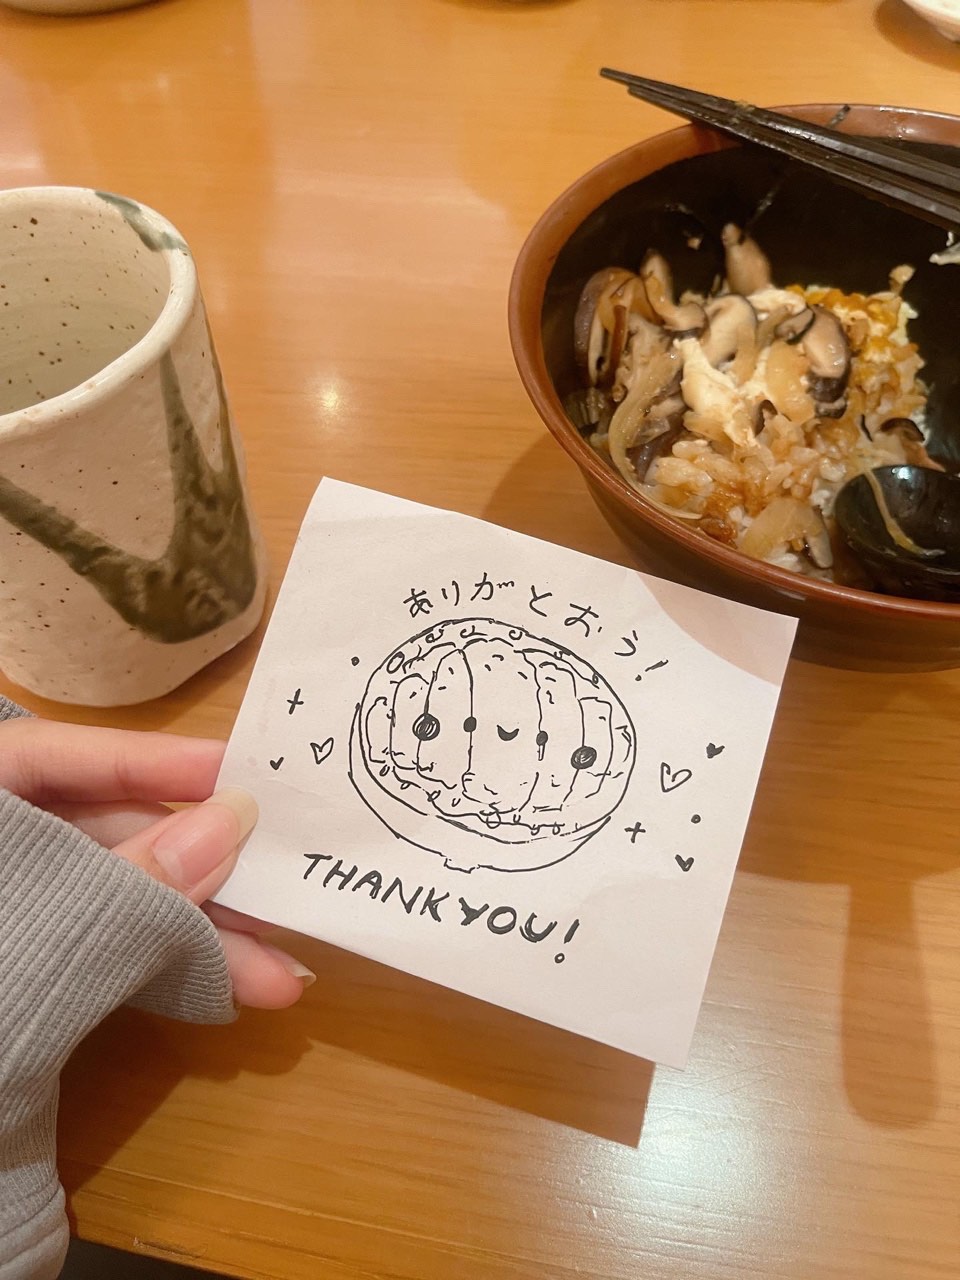 Cute doodle of a food done by a msian artist to convey her thanks